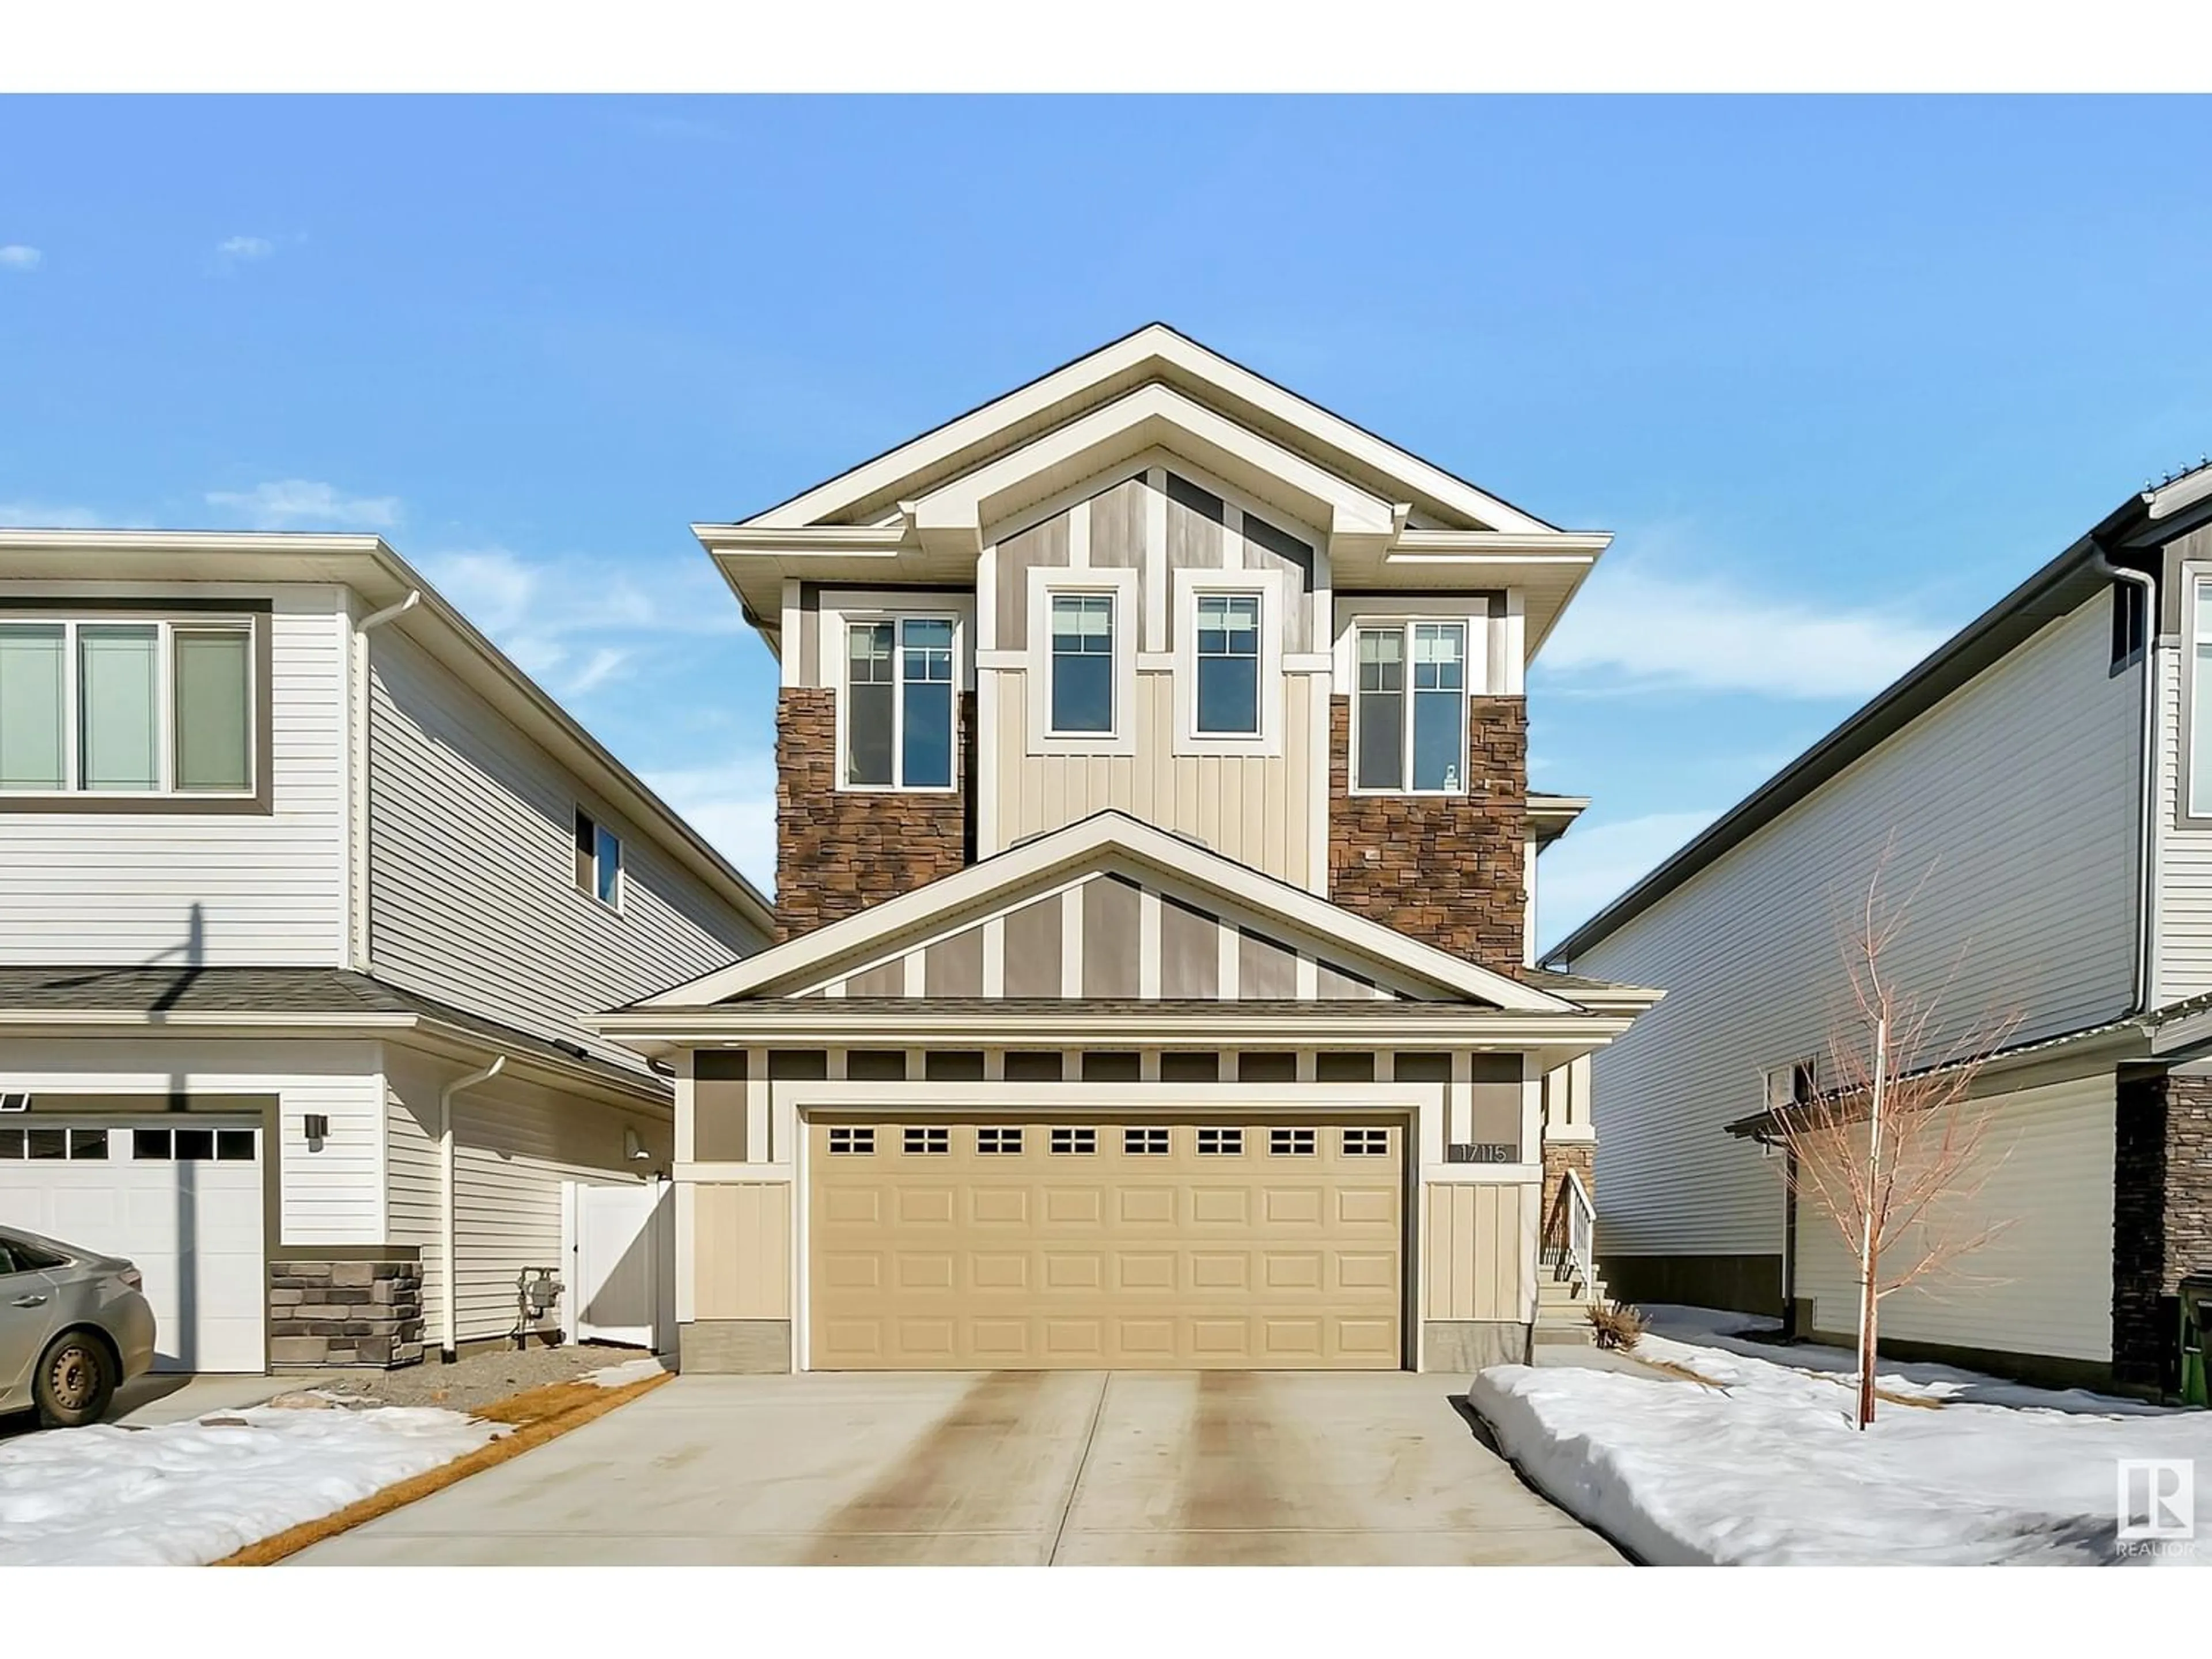 A pic from exterior of the house or condo for 17115 46 ST NW, Edmonton Alberta T5Y4B1